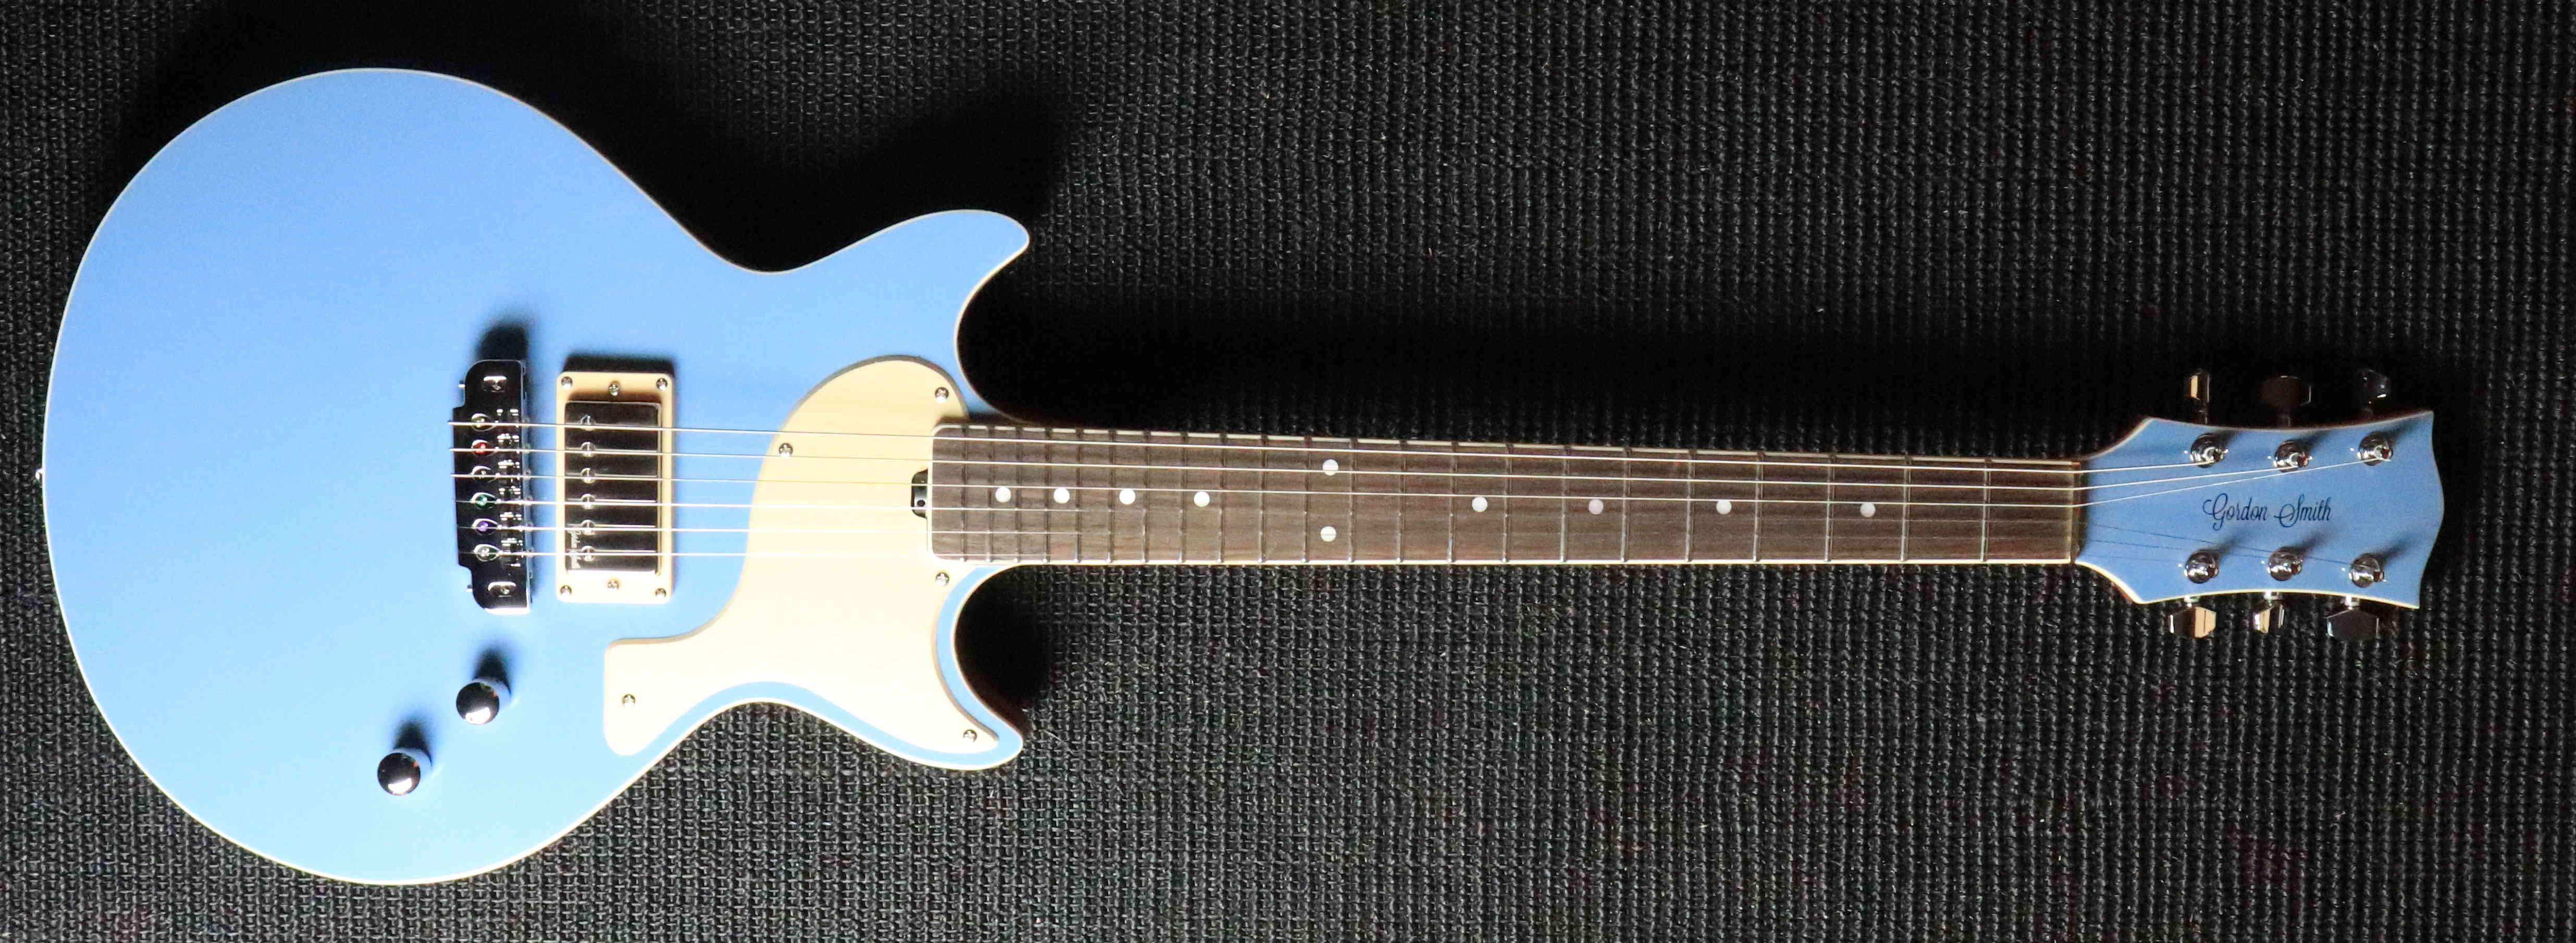 Gordon Smith GS1000 Blue, Electric Guitar for sale at Richards Guitars.